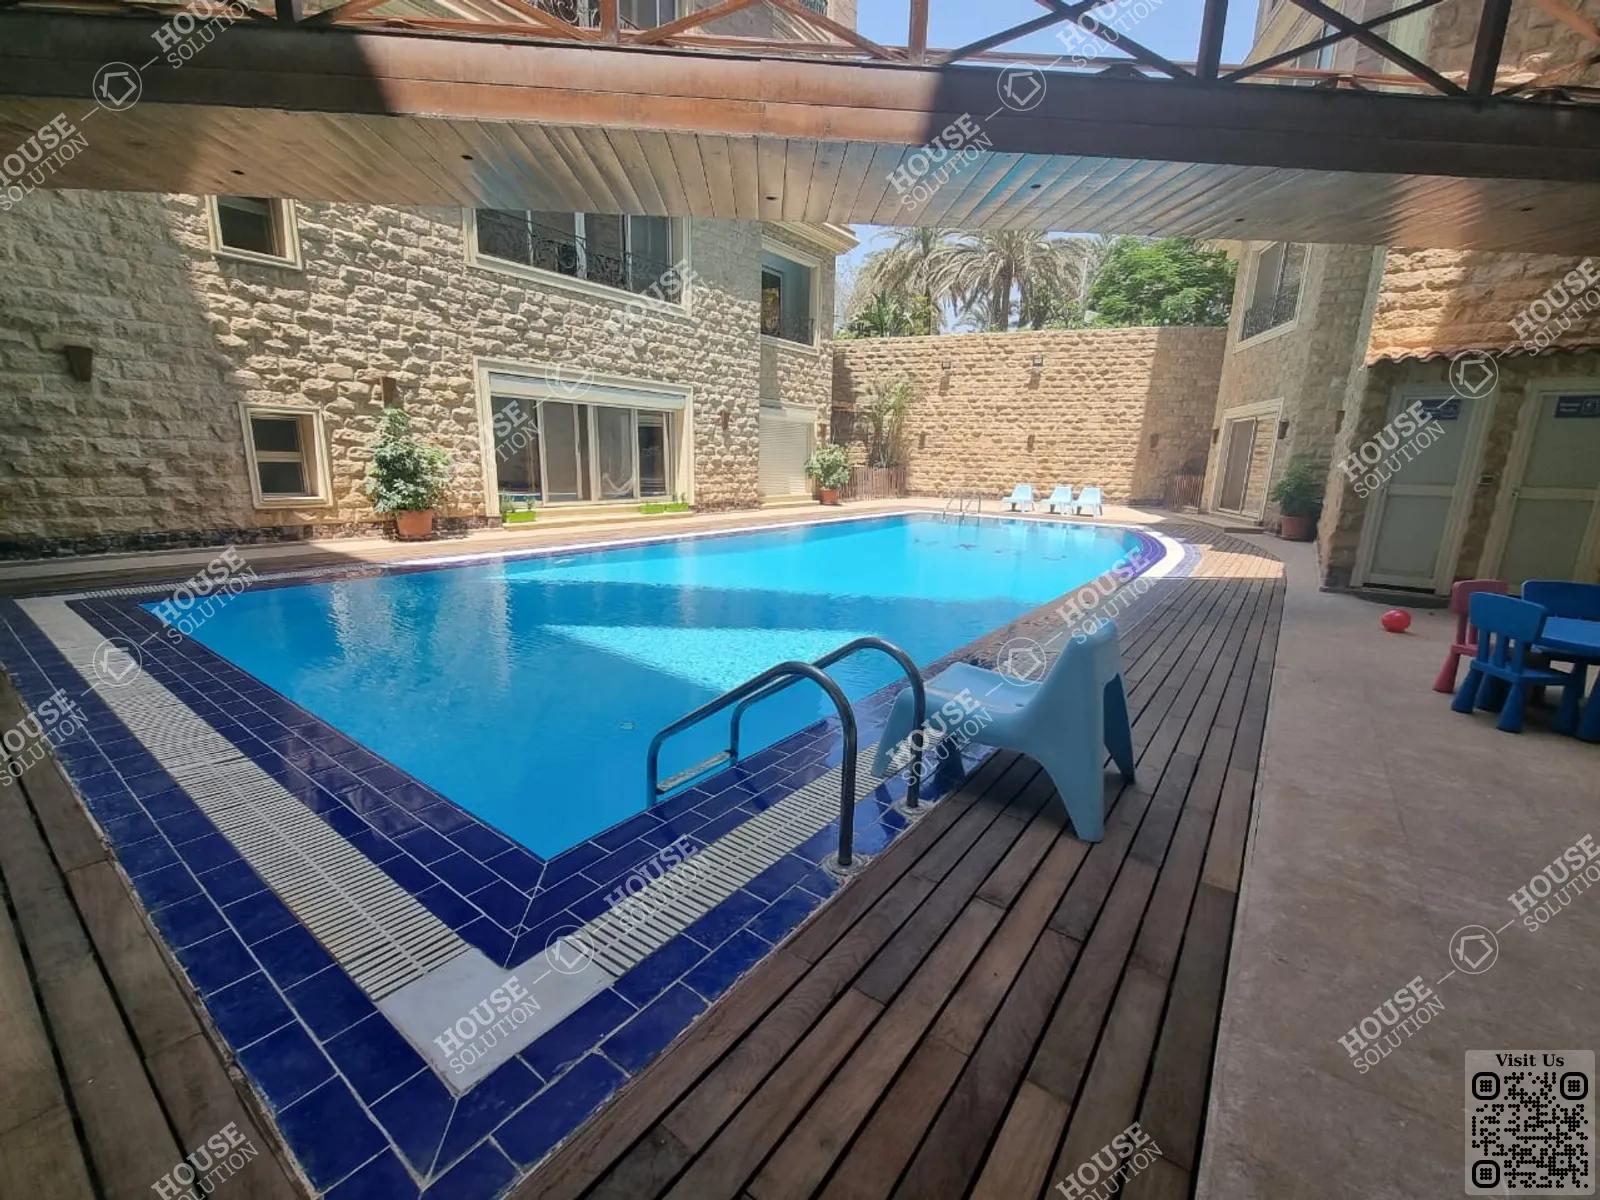 SHARED SWIMMING POOL  @ Apartments For Rent In Maadi Maadi Sarayat Area: 250 m² consists of 4 Bedrooms 4 Bathrooms Modern furnished 5 stars #5340-2